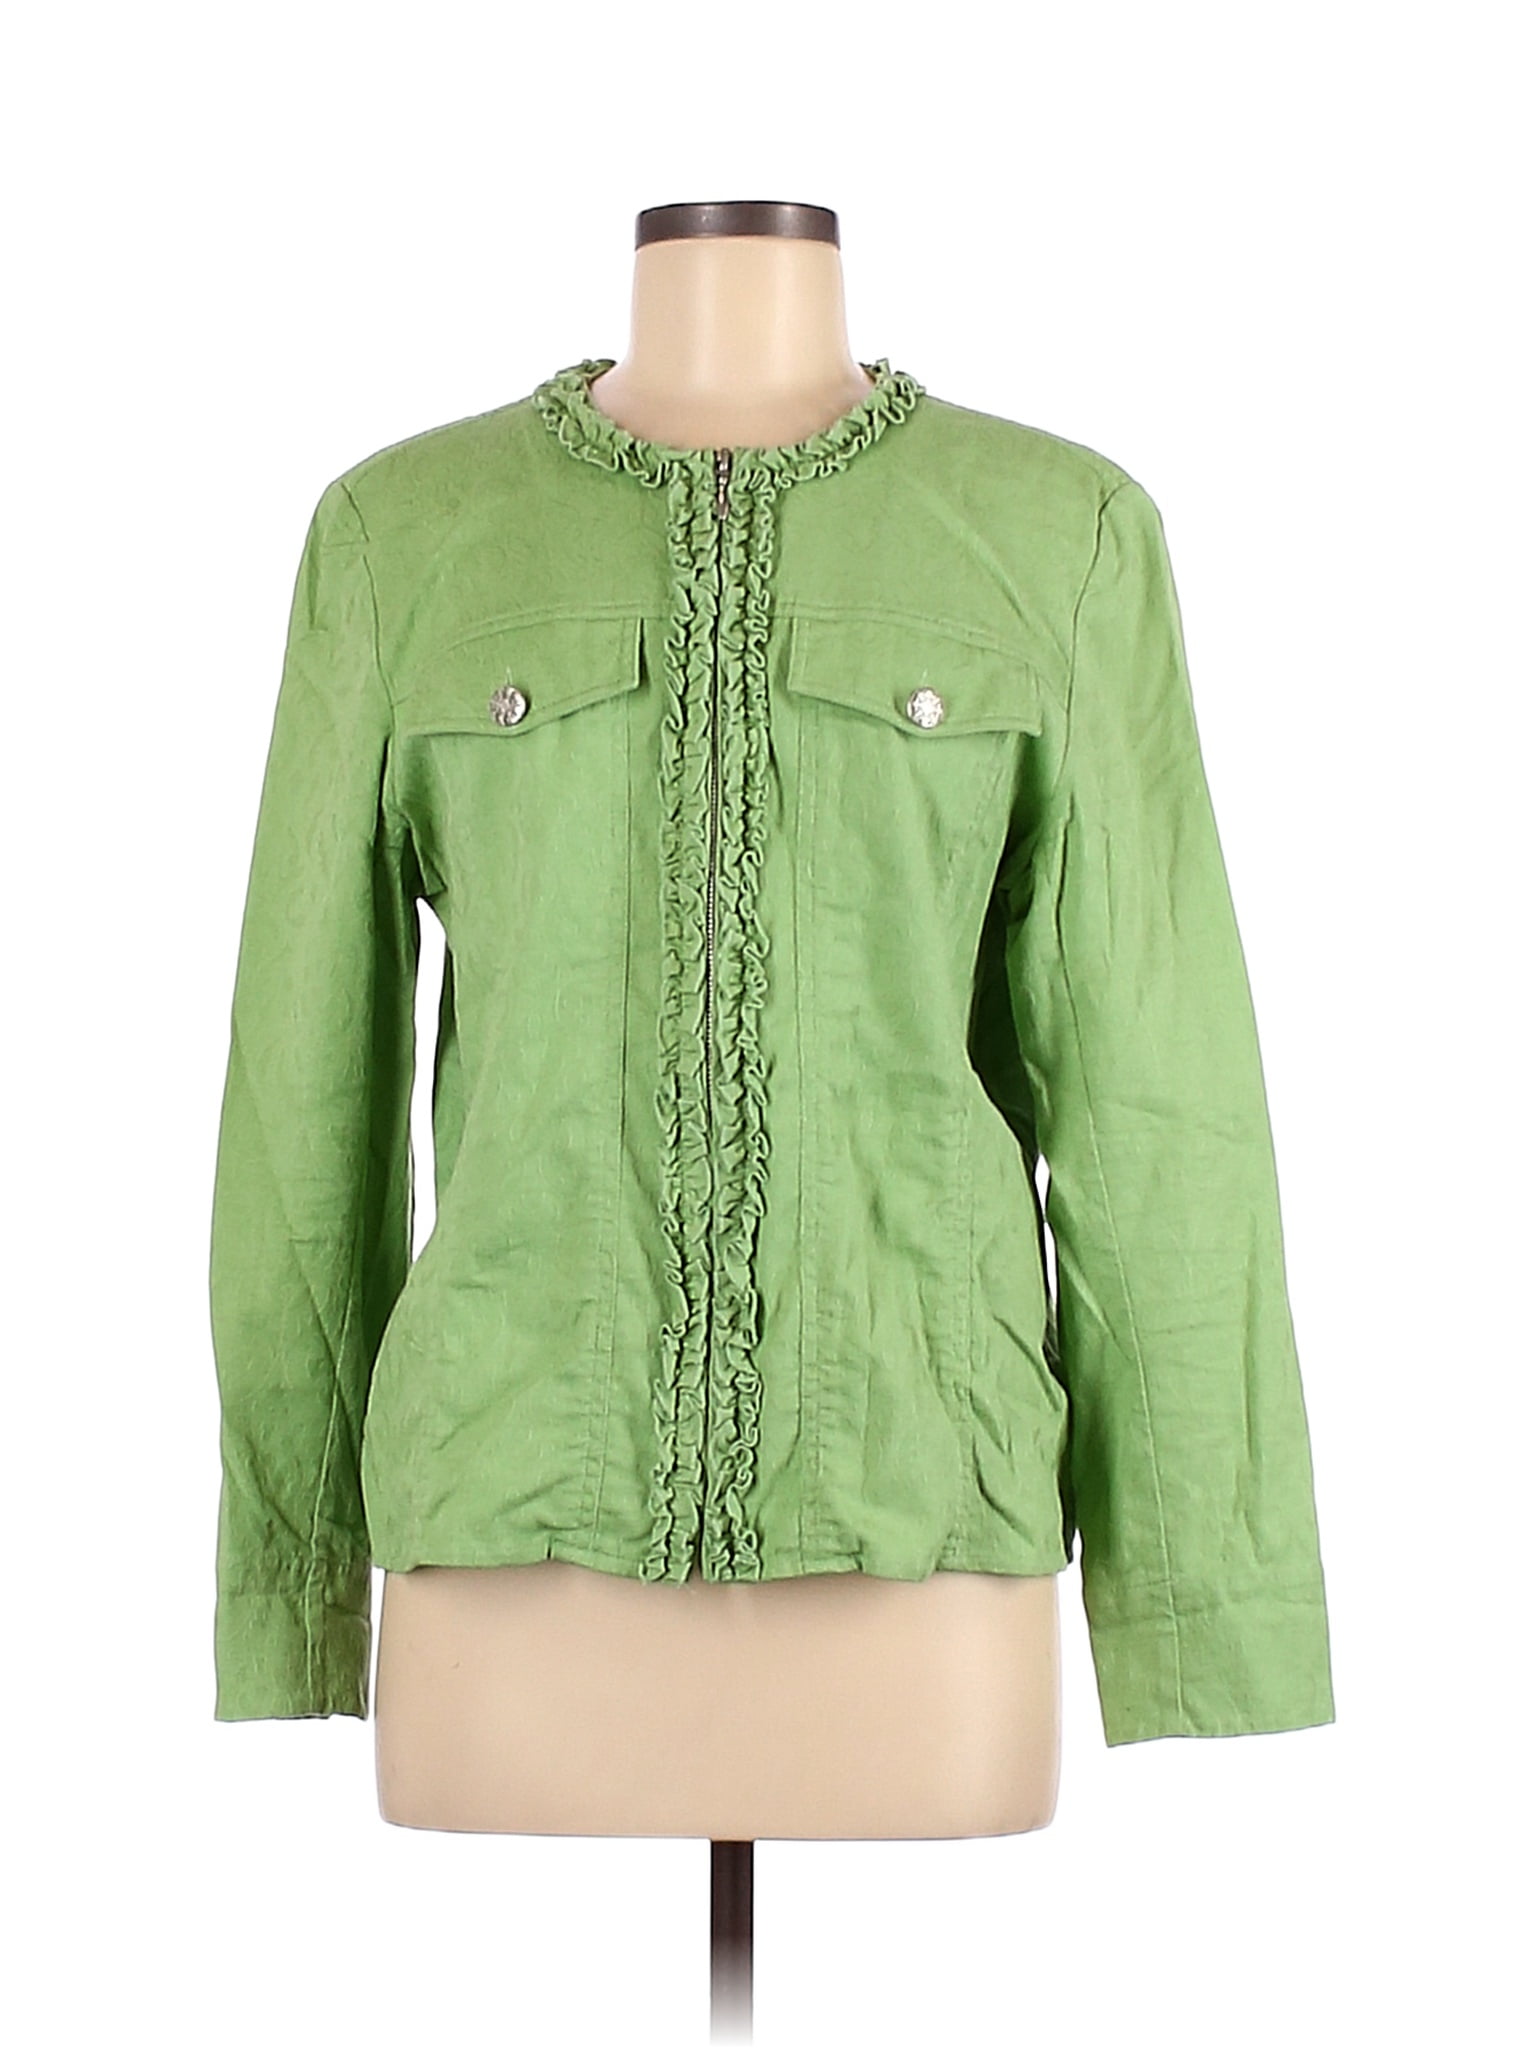 Coldwater Creek Solid Colored Green Jacket Size M - 72% off | thredUP